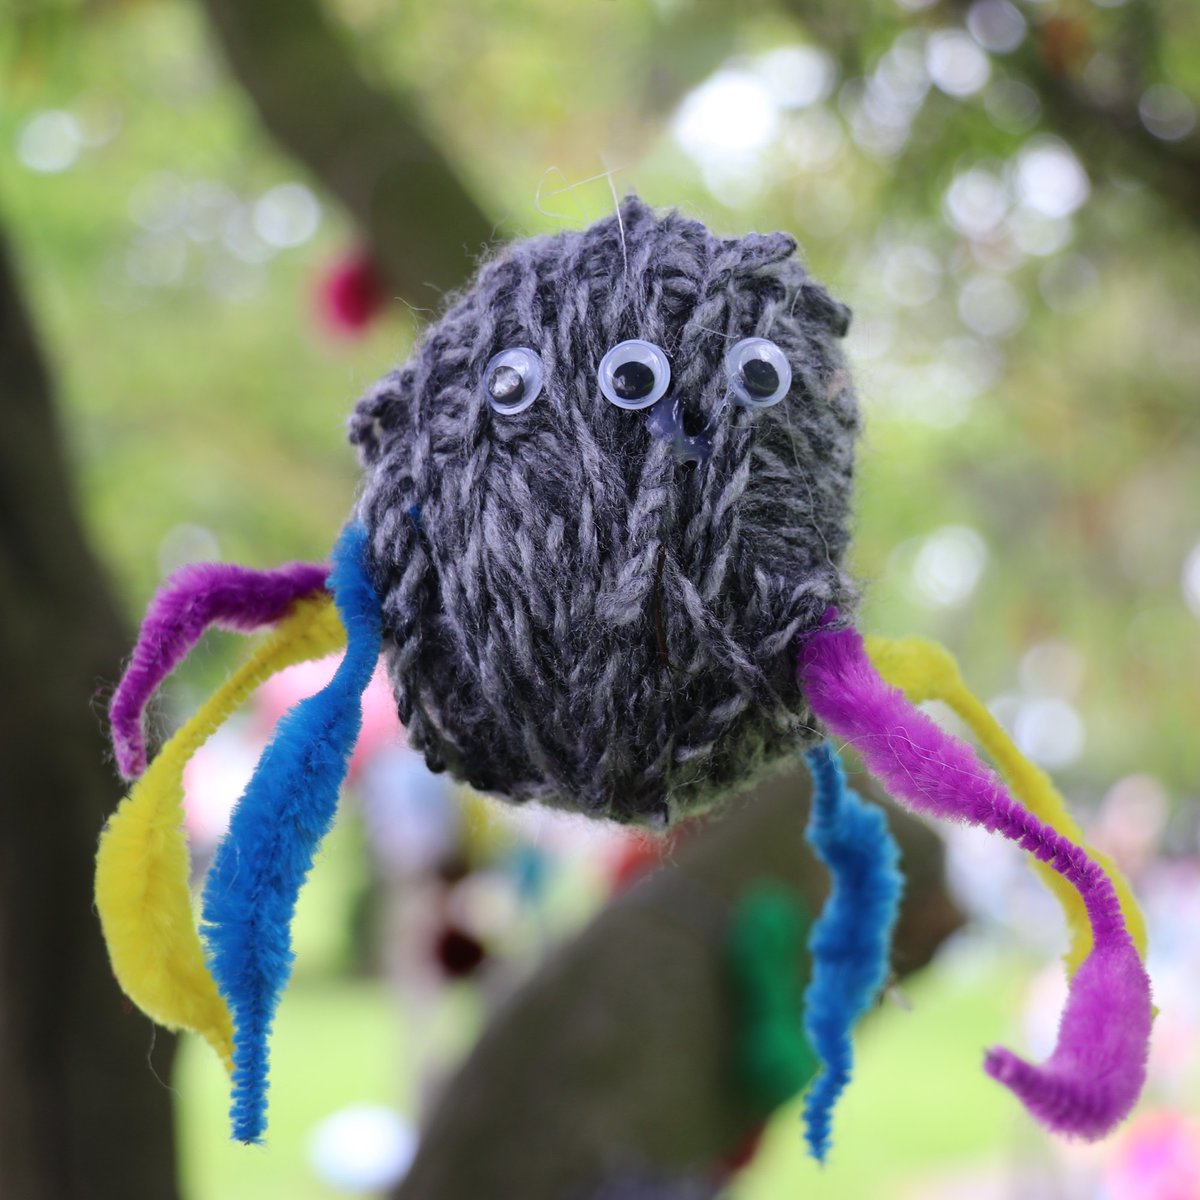 The Yarn Bomb - Mad as a Box of Frogs runs in the #LiffeyLinearPark from Sat 1 June to Sunday 30 June. Lots of folks contribute to this huge installation in the Liffey Linear Park each year. More Info: junefest.ie/events & facebook.com/kildareyarnbom…